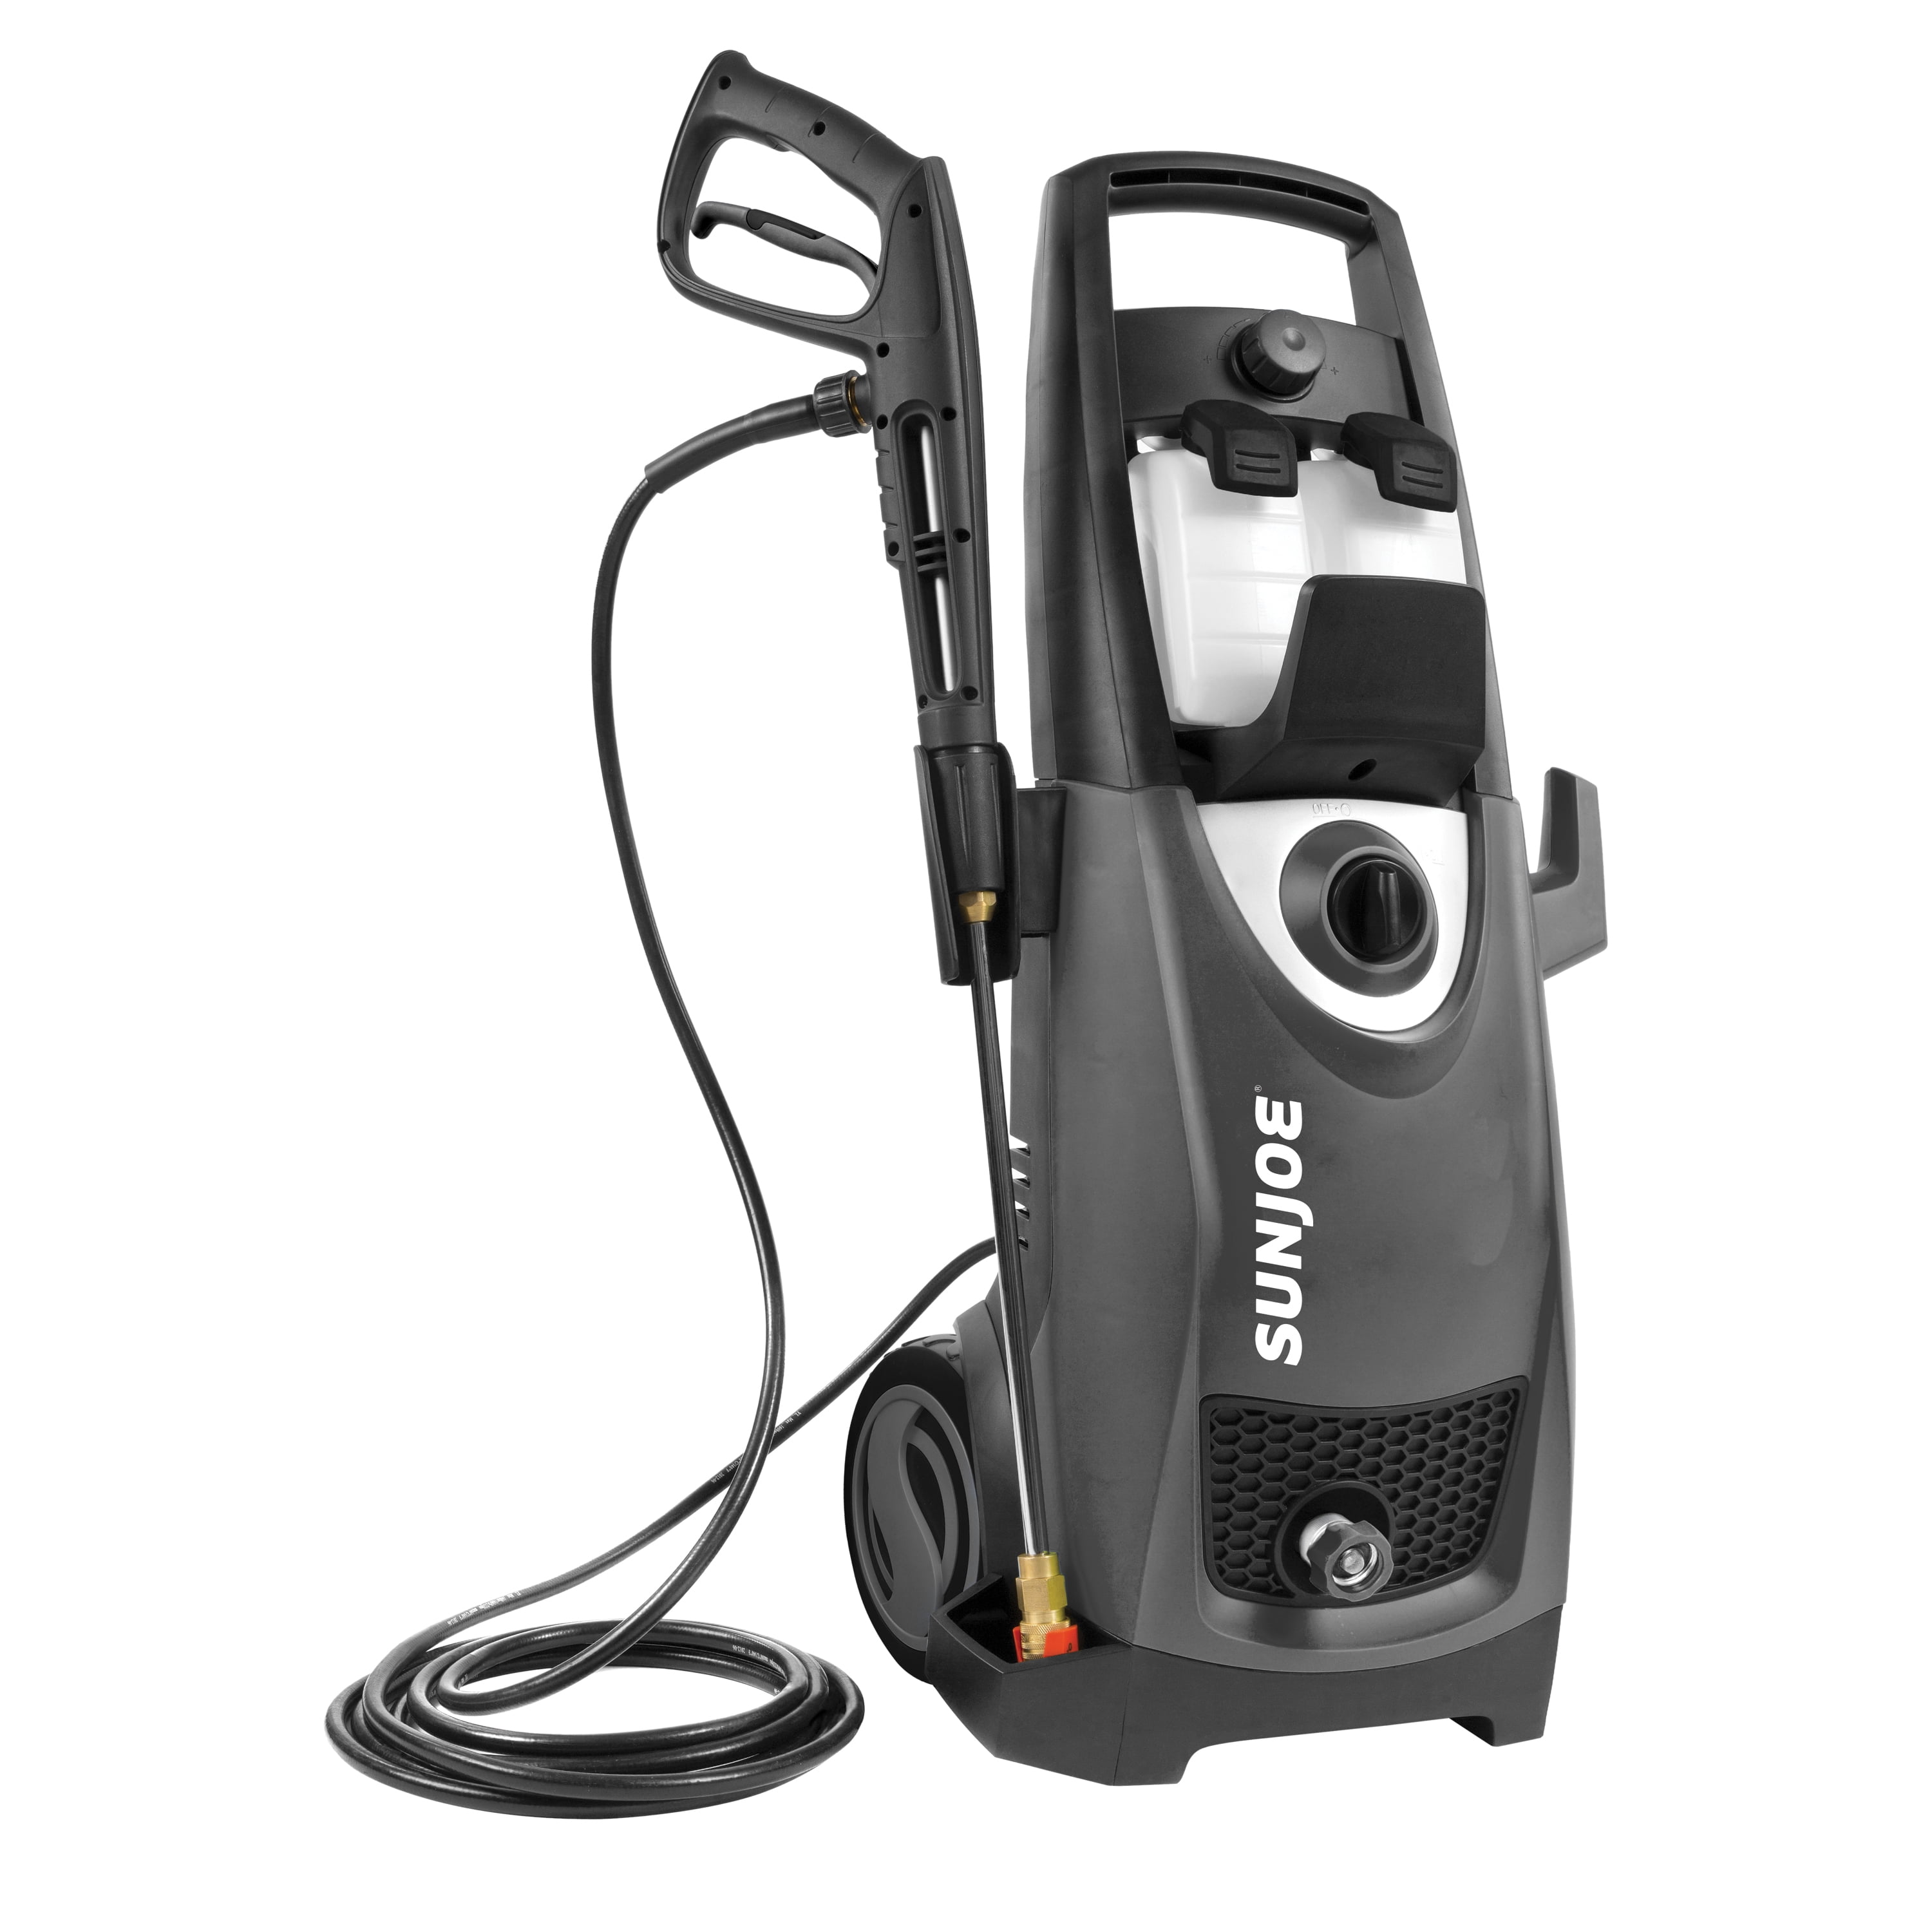 Sun Joe SPX3000 Electric Pressure Washer, 14.5-Amp, Quick-Connect Tips, Black - image 1 of 12